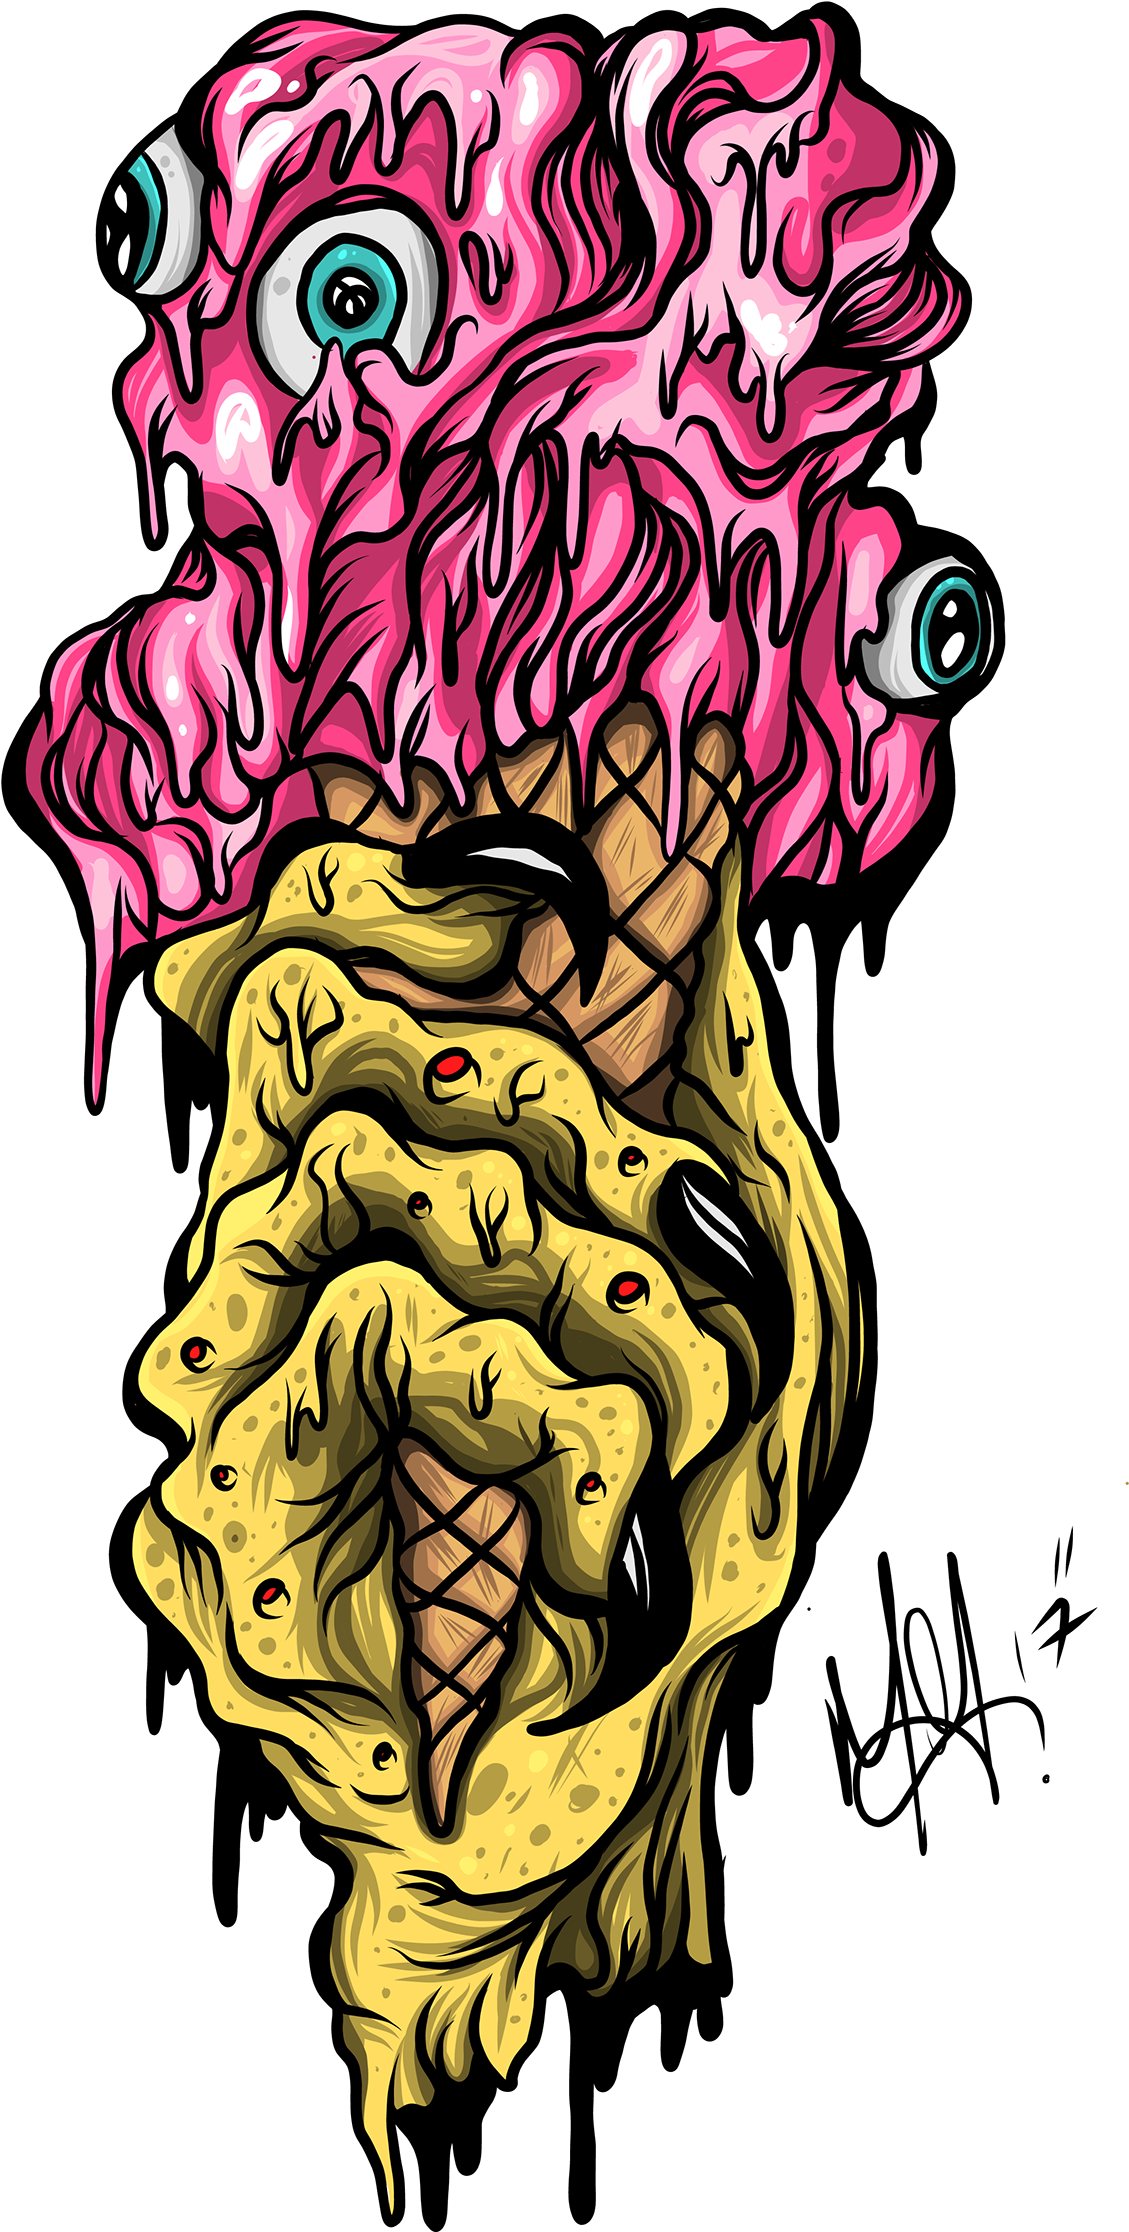 Pick Up Your Zombie Ice Cream Apparel At The Link Below - Zombie Ice Cream (1200x2266)